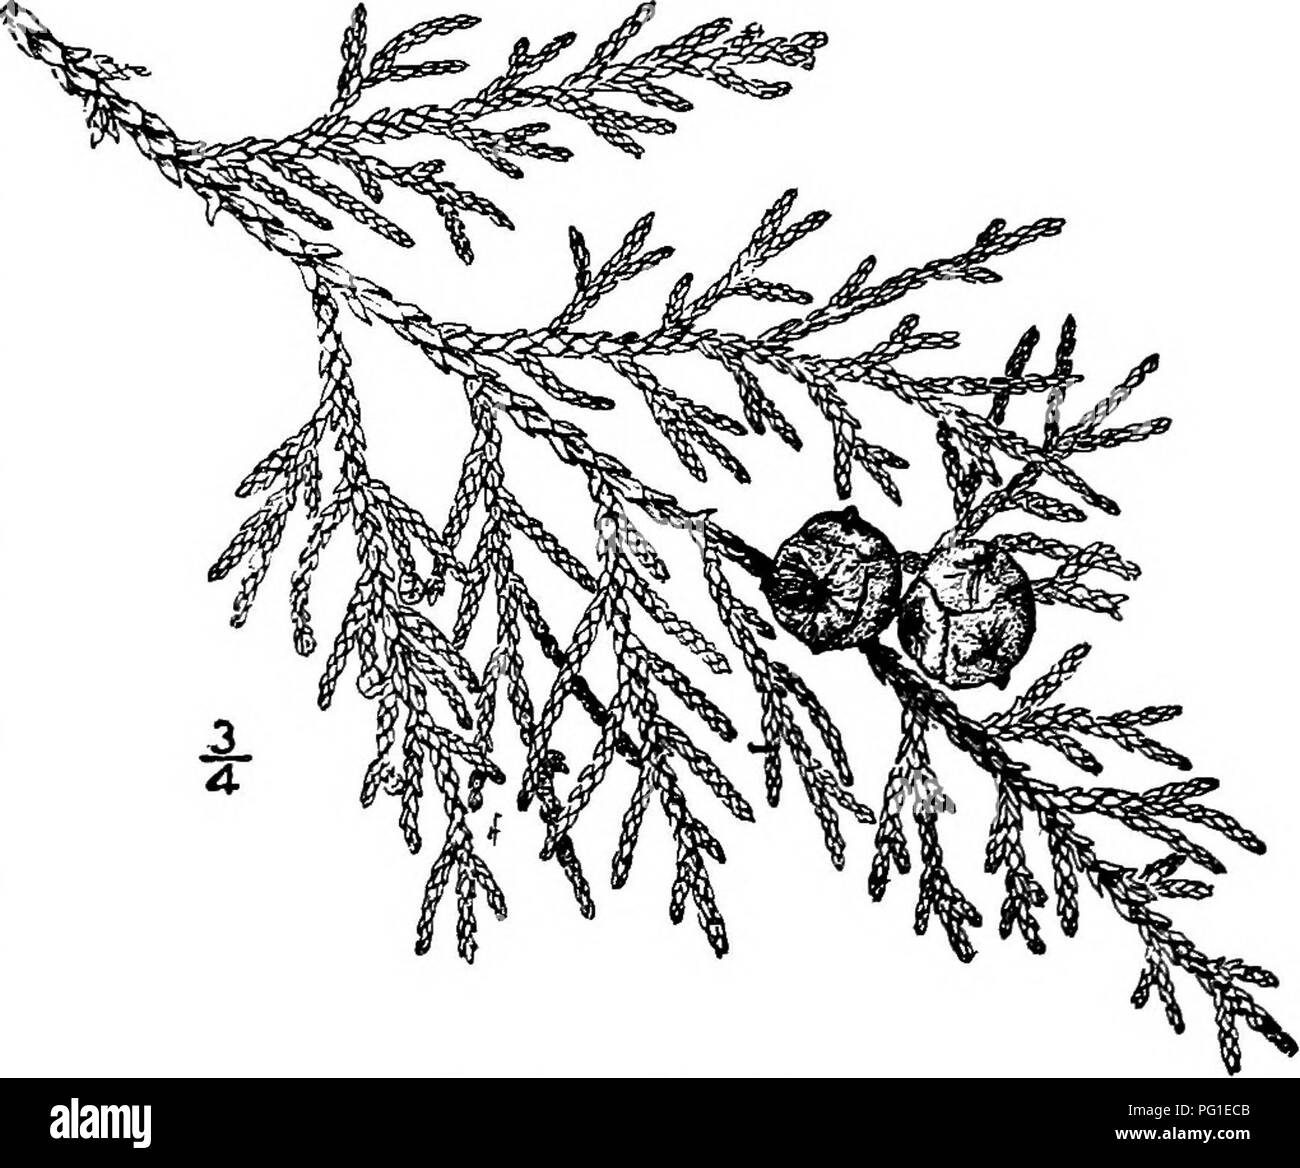 . North American trees : being descriptions and illustrations of the trees growing independently of cultivation in North America, north of Mexico and the West Indies . Trees. Fig. 79. — White Cedar. 2. SITKA CYPRESS — Chamaecyparis nootkatensis (Lambert) Spach Cupressus nootkatensis Lambert A tall slender tree occurring from Alaska southward through British Co- lumbia and Washington to Oregon. At the north it occurs at sea level, southward it is found at higher elevations up to 1200 meters, where it is of ten,reduced to shrub- by forms. Its maximum height is 36 meters, with a trunk diameter of Stock Photo